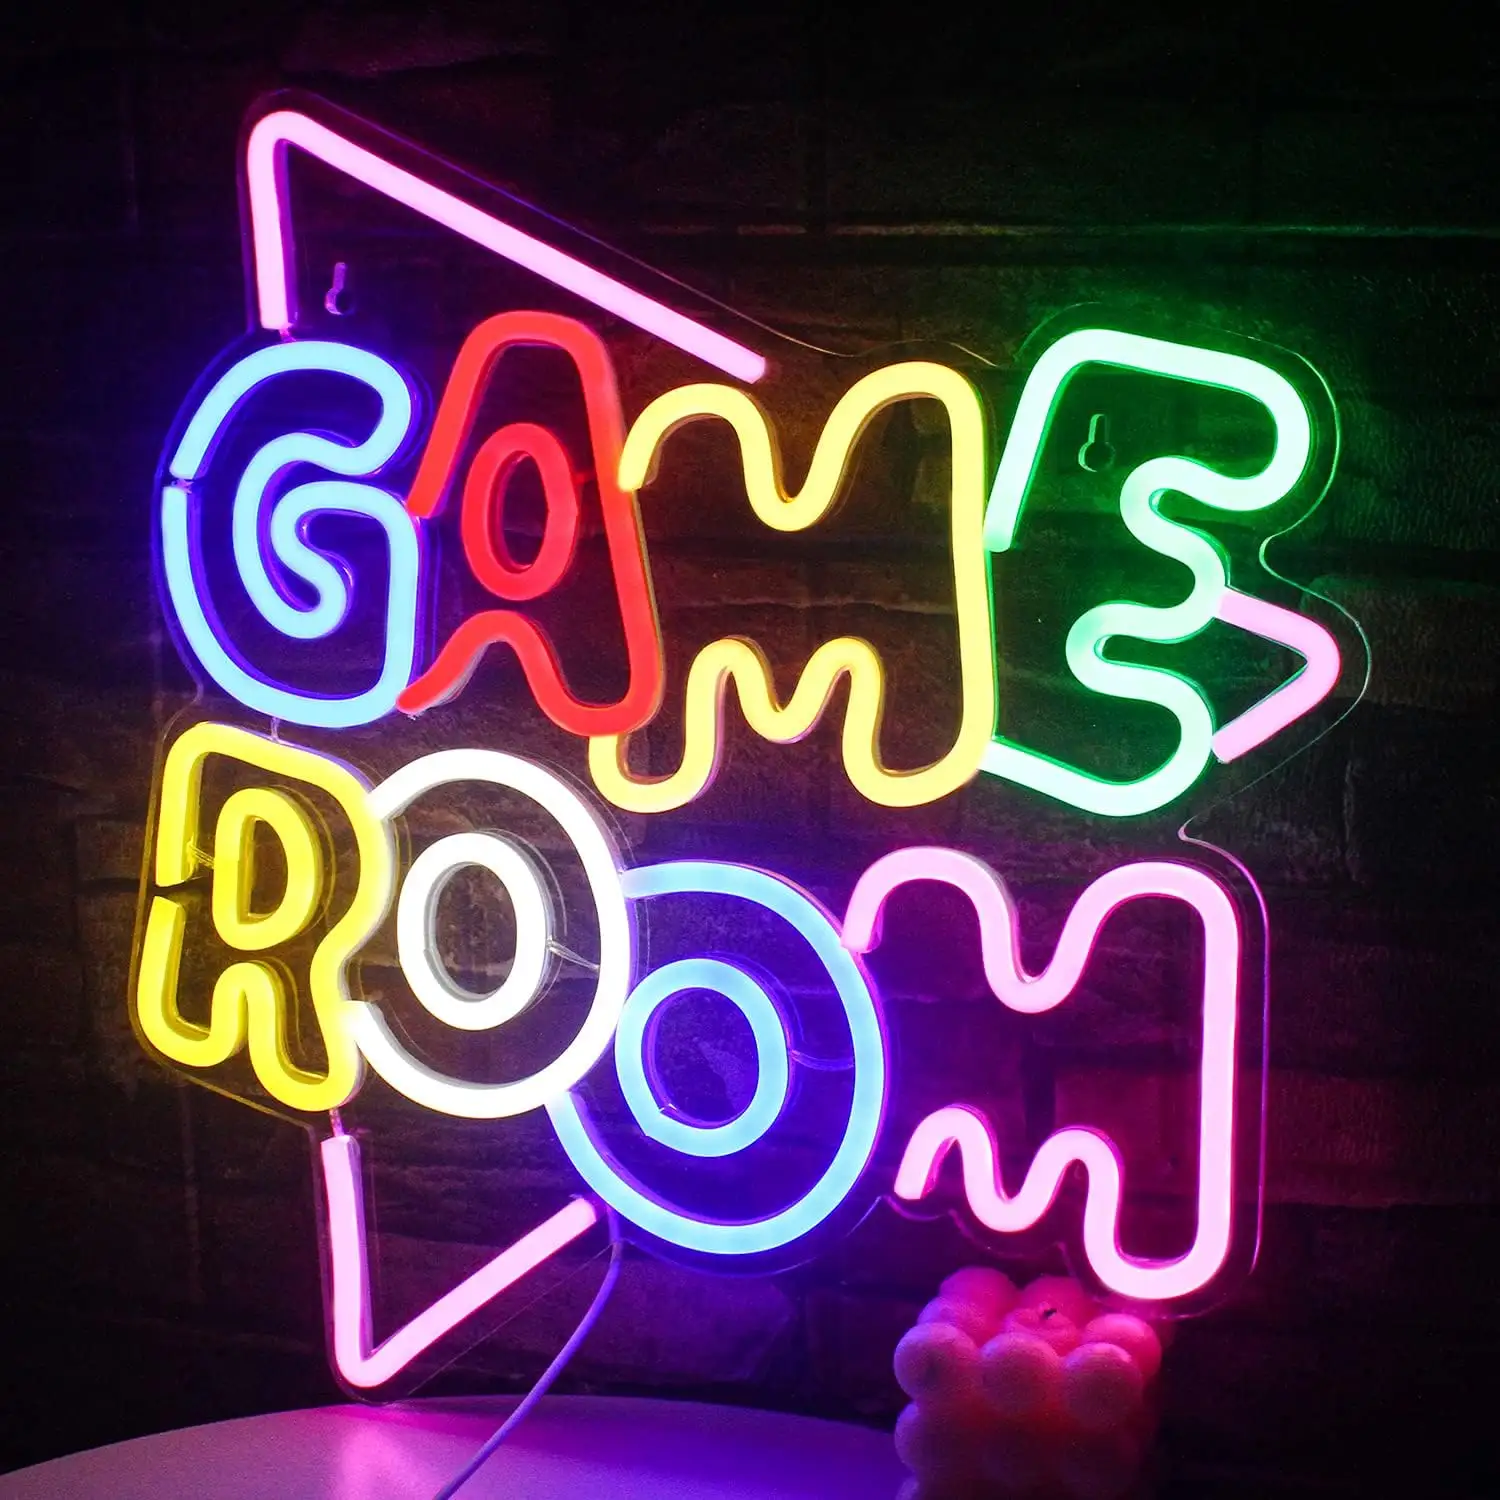 Game Room Large Neon Signs 13.2"x14" Colorful LED Neon Lights for Wall Decor USB Neon Lights for Game Zone Wall Lightup Signs